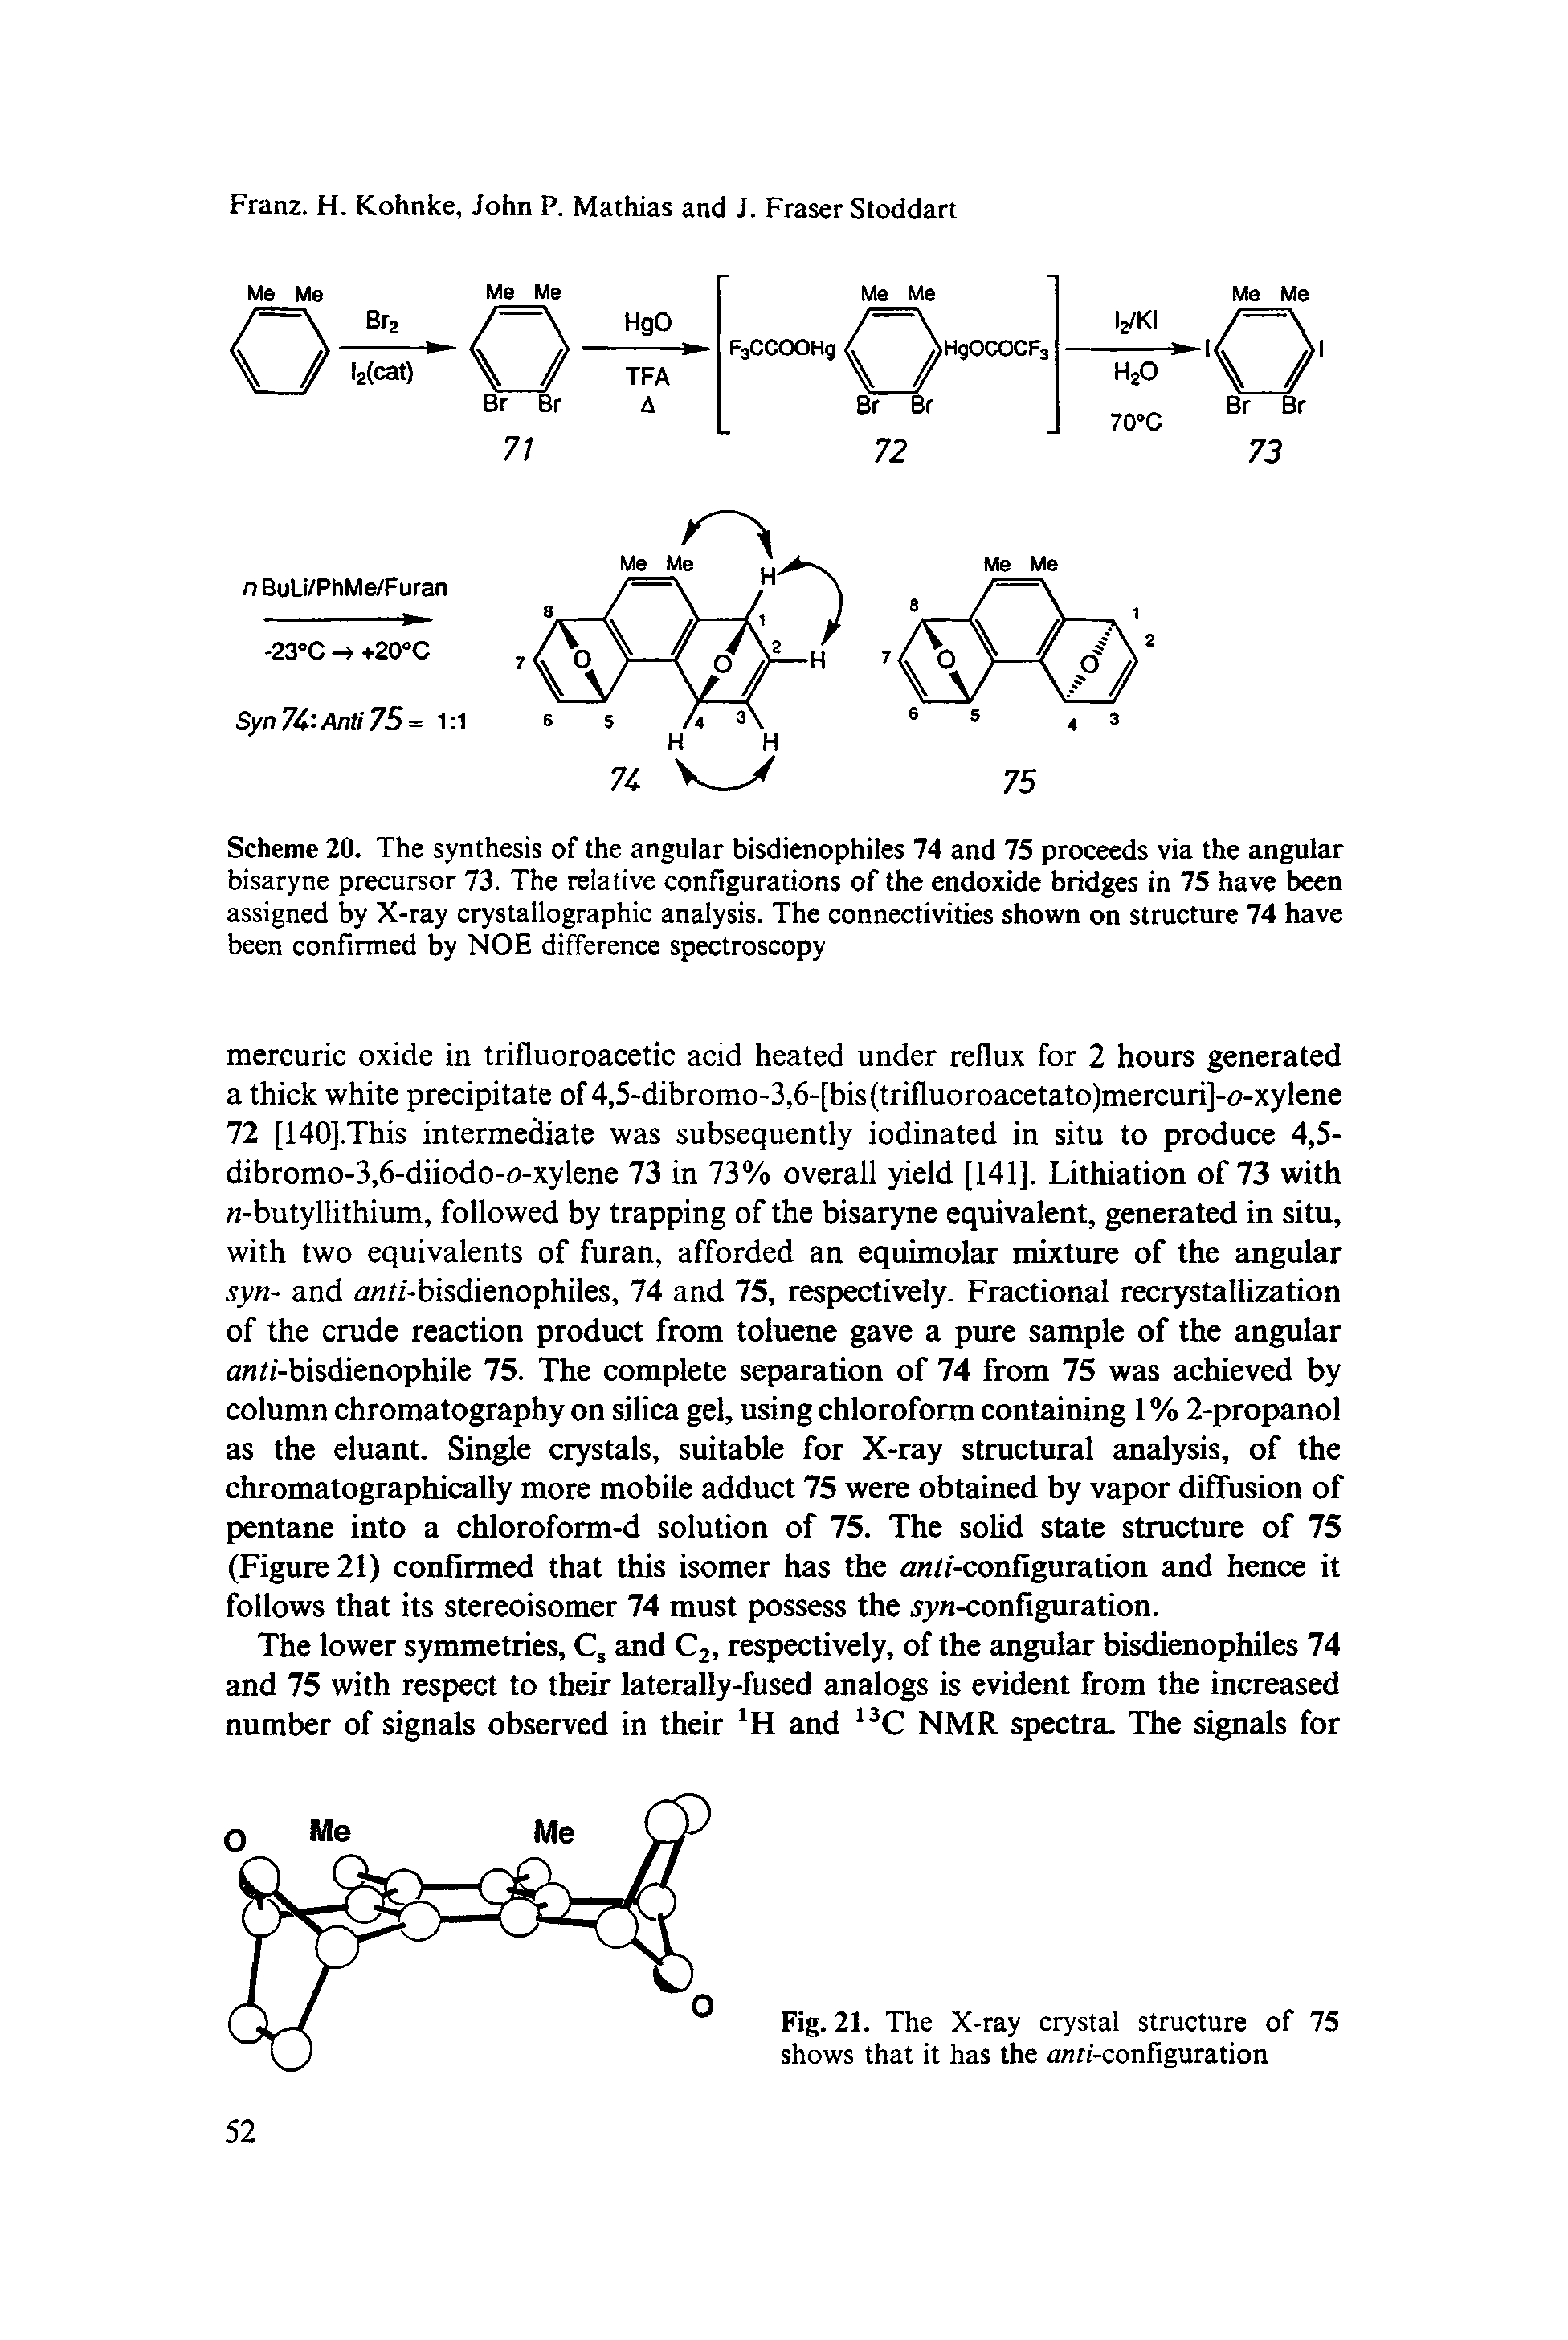 Scheme 20. The synthesis of the angular bisdienophiles 74 and 75 proceeds via the angular bisaryne precursor 73. The relative configurations of the endoxide bridges in 75 have been assigned by X-ray crystallographic analysis. The connectivities shown on structure 74 have been confirmed by NOE difference spectroscopy...